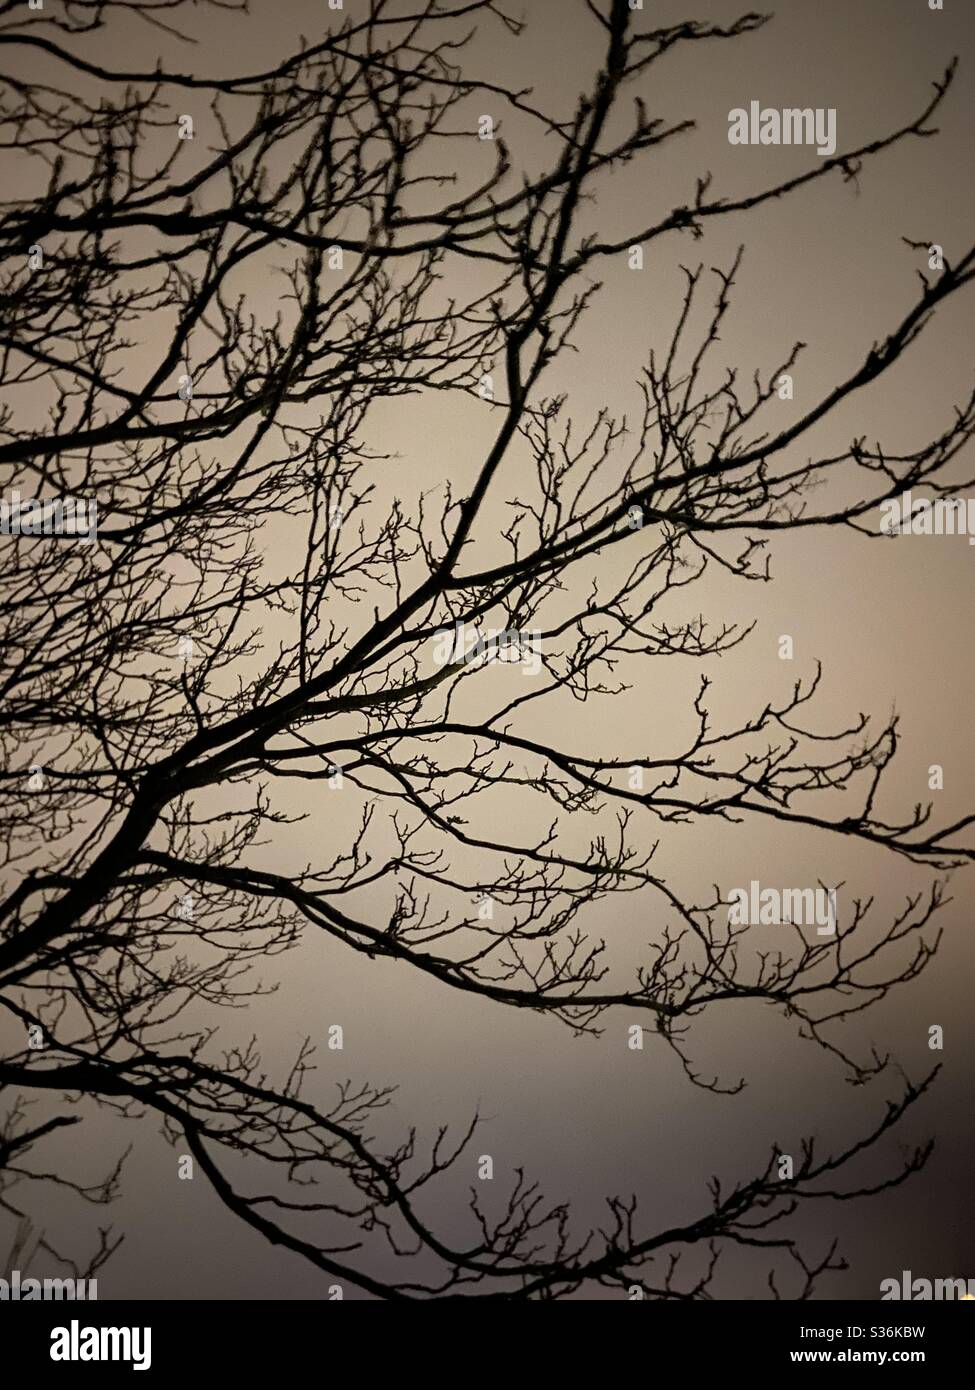 Silhouette of a tree against an eery night sky Stock Photo